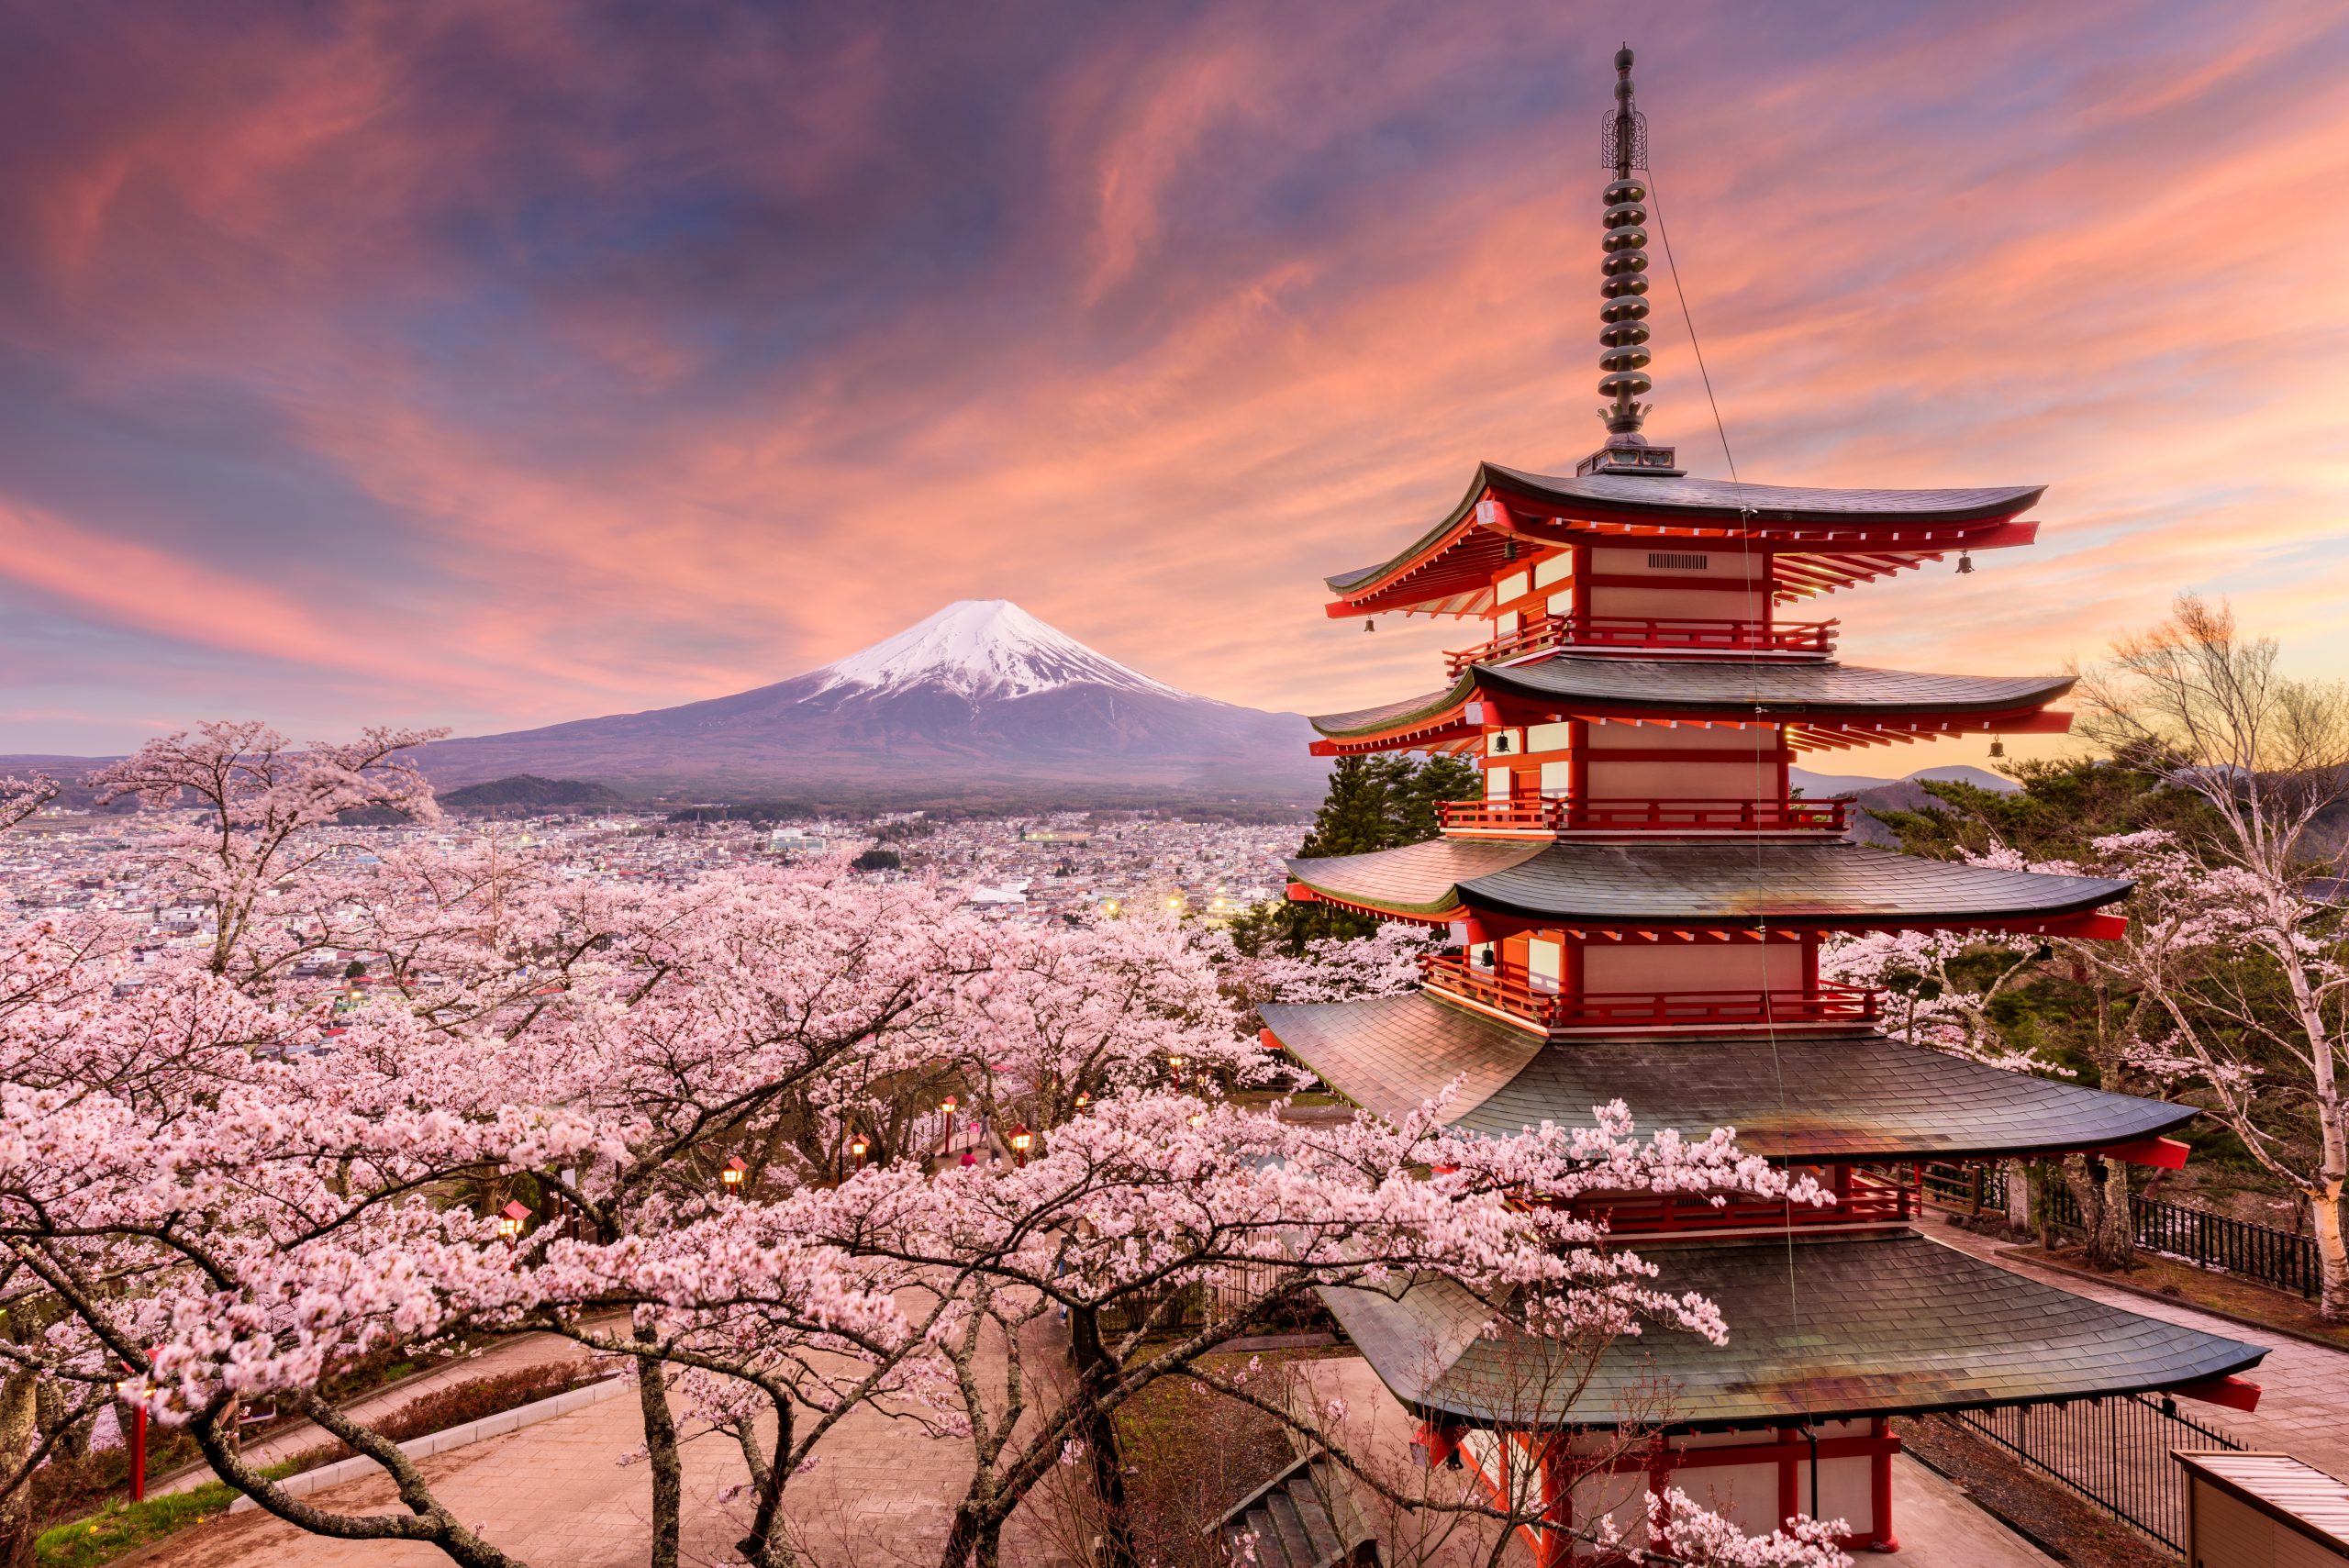 Cruise to Japan for the amazing cherry blossom season and Mount Fuji from $353pp per night.